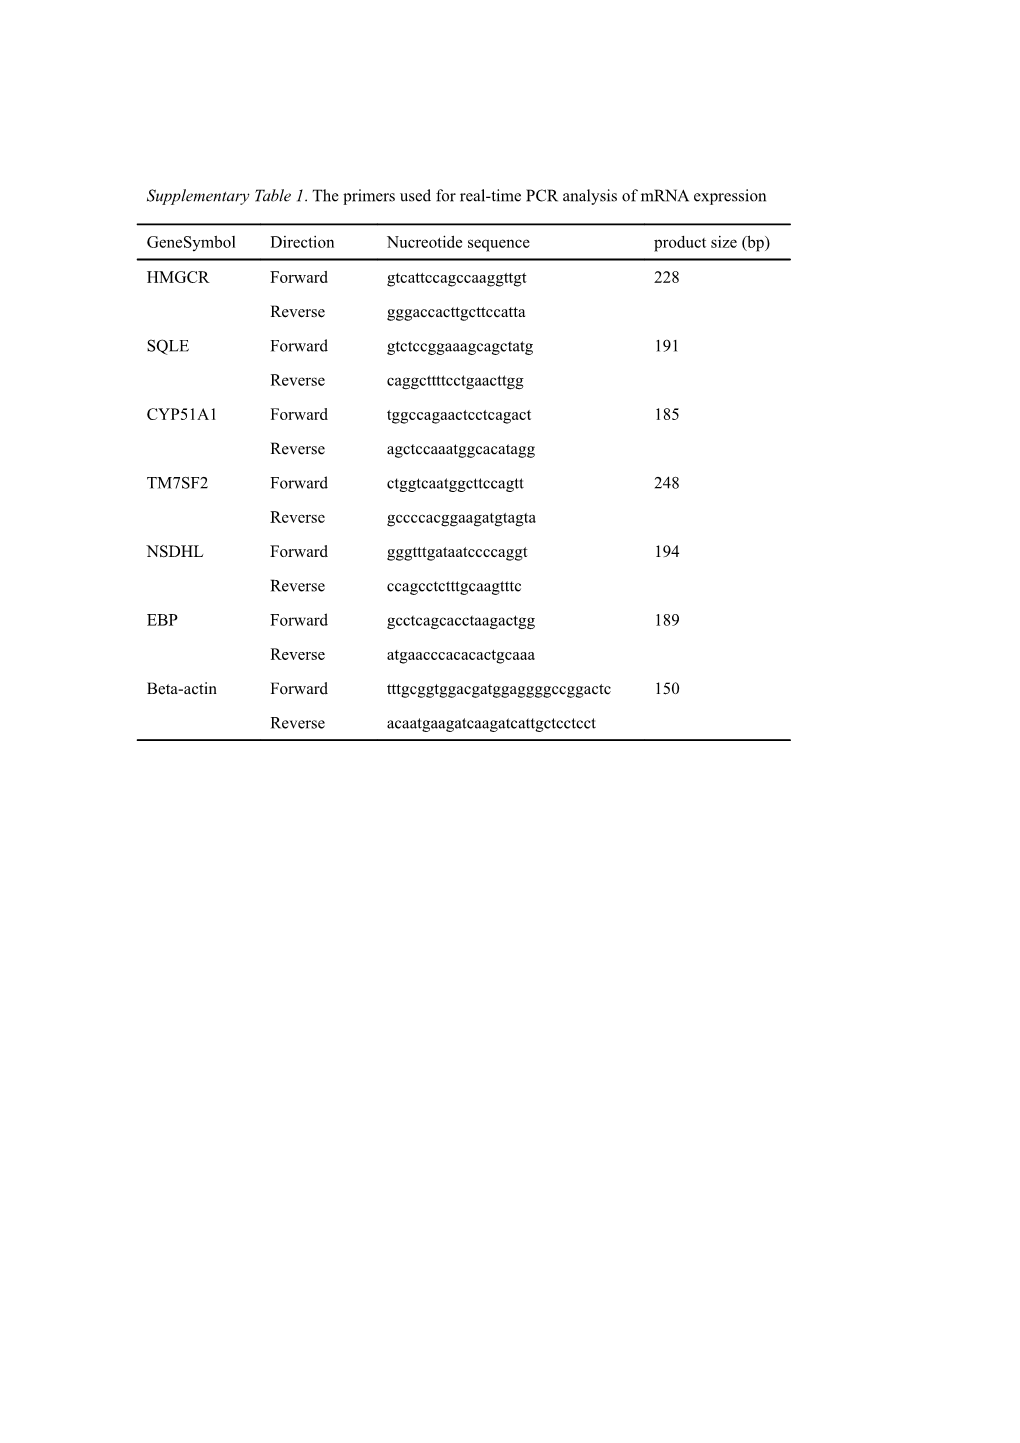 Supplementary Table 1. the Primers Used for Real-Time PCR Analysis of Mrna Expression